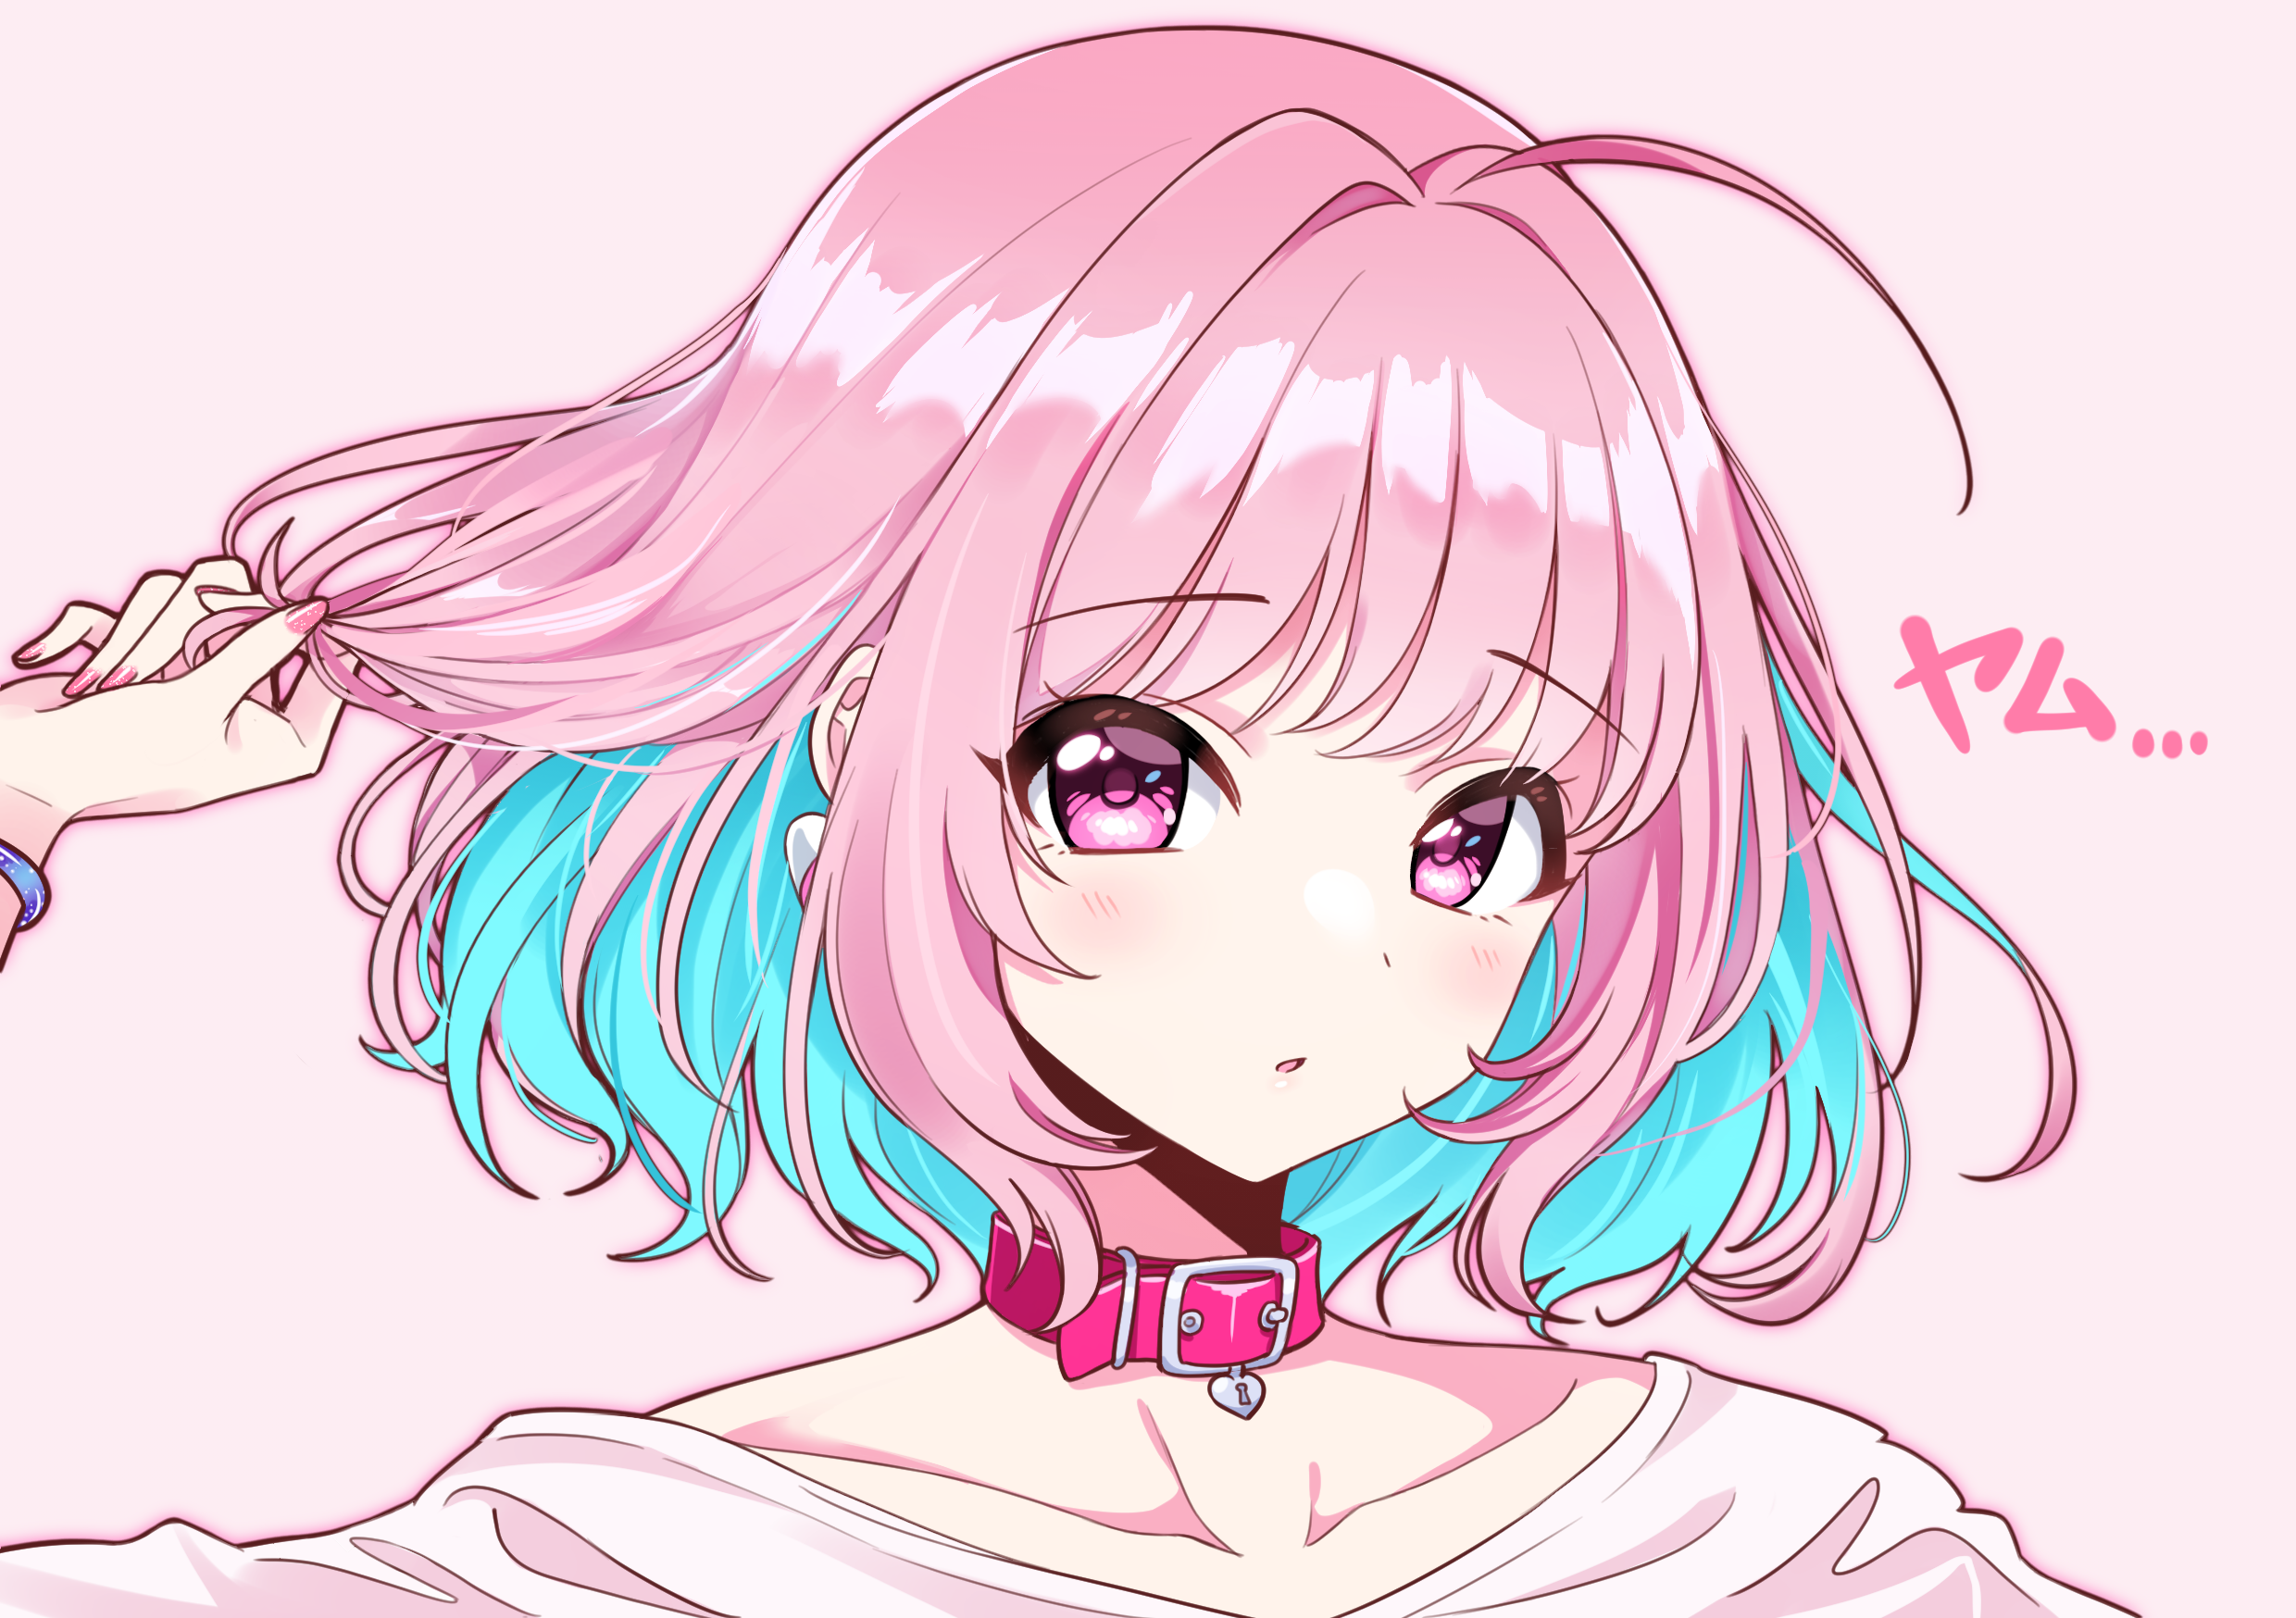 7. Anime girl with pink hair and blue eyes fanart - wide 1